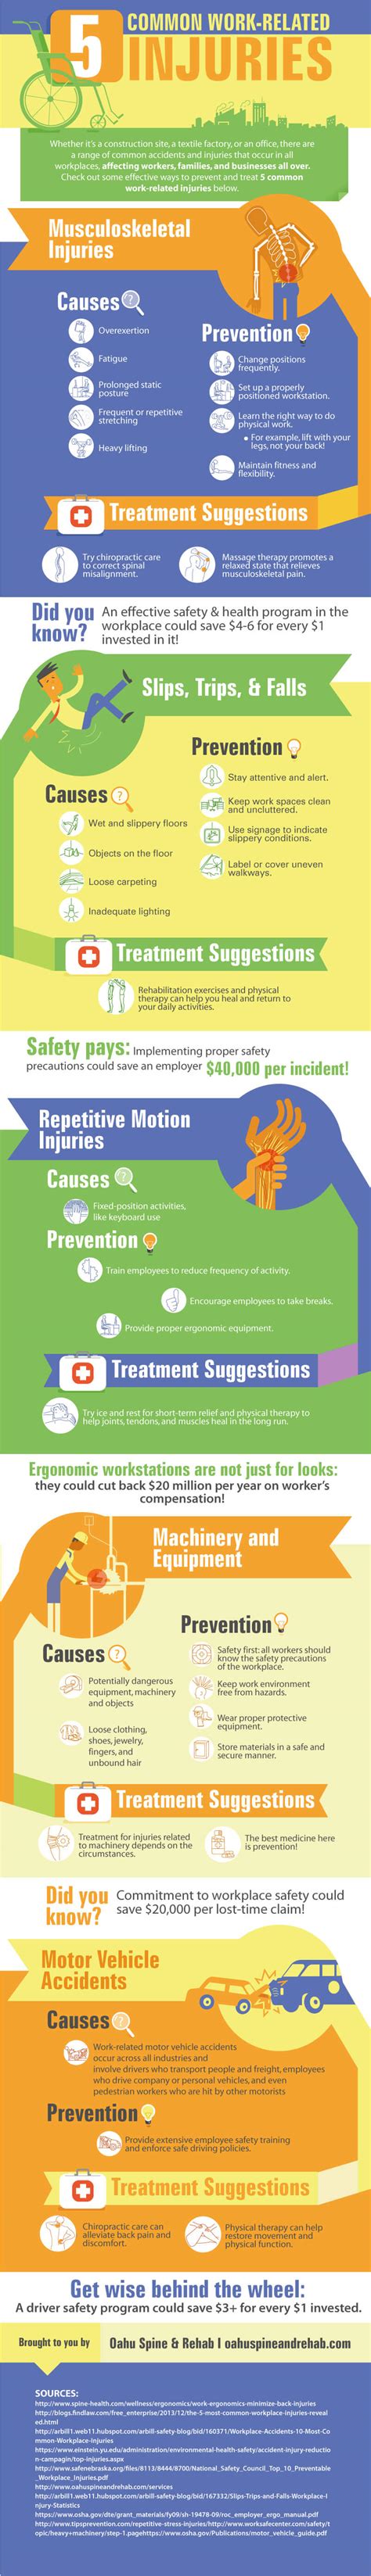 common work related injuries infographic